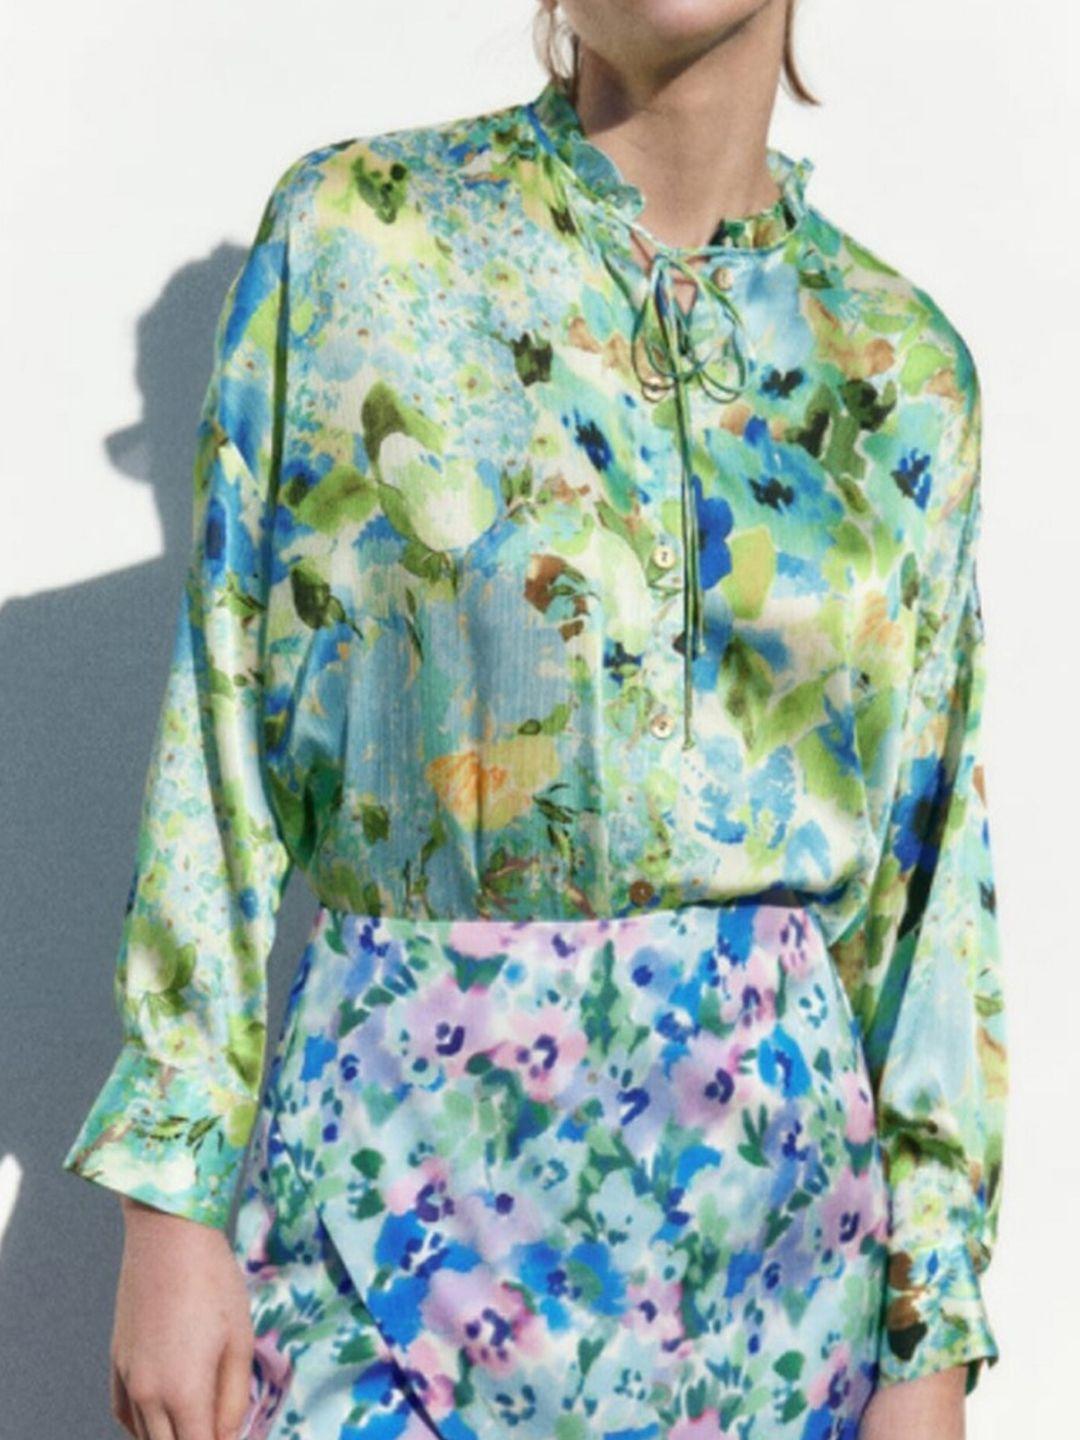 lulu & sky floral printed tie-up neck shirt style top